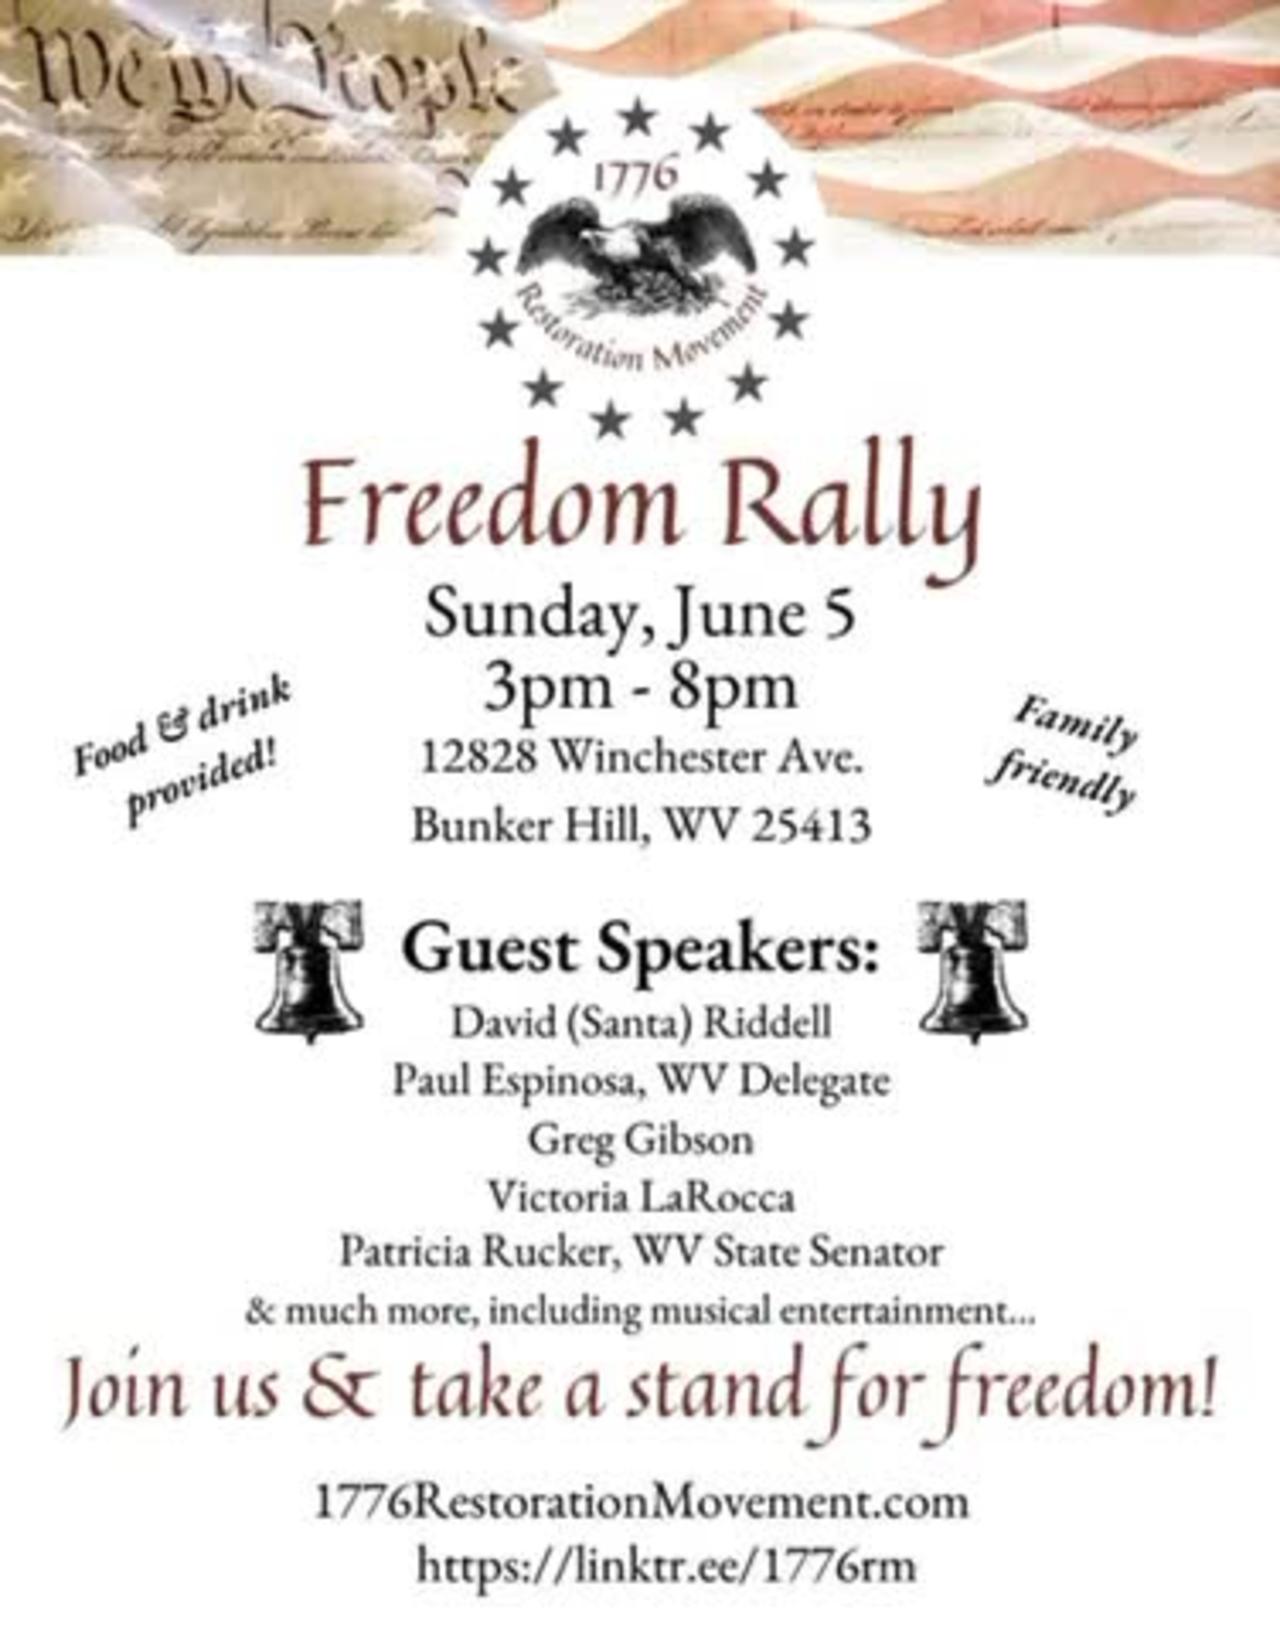 Live - 1776 Restoration Movement - Freedom Rally - Bunker Hill